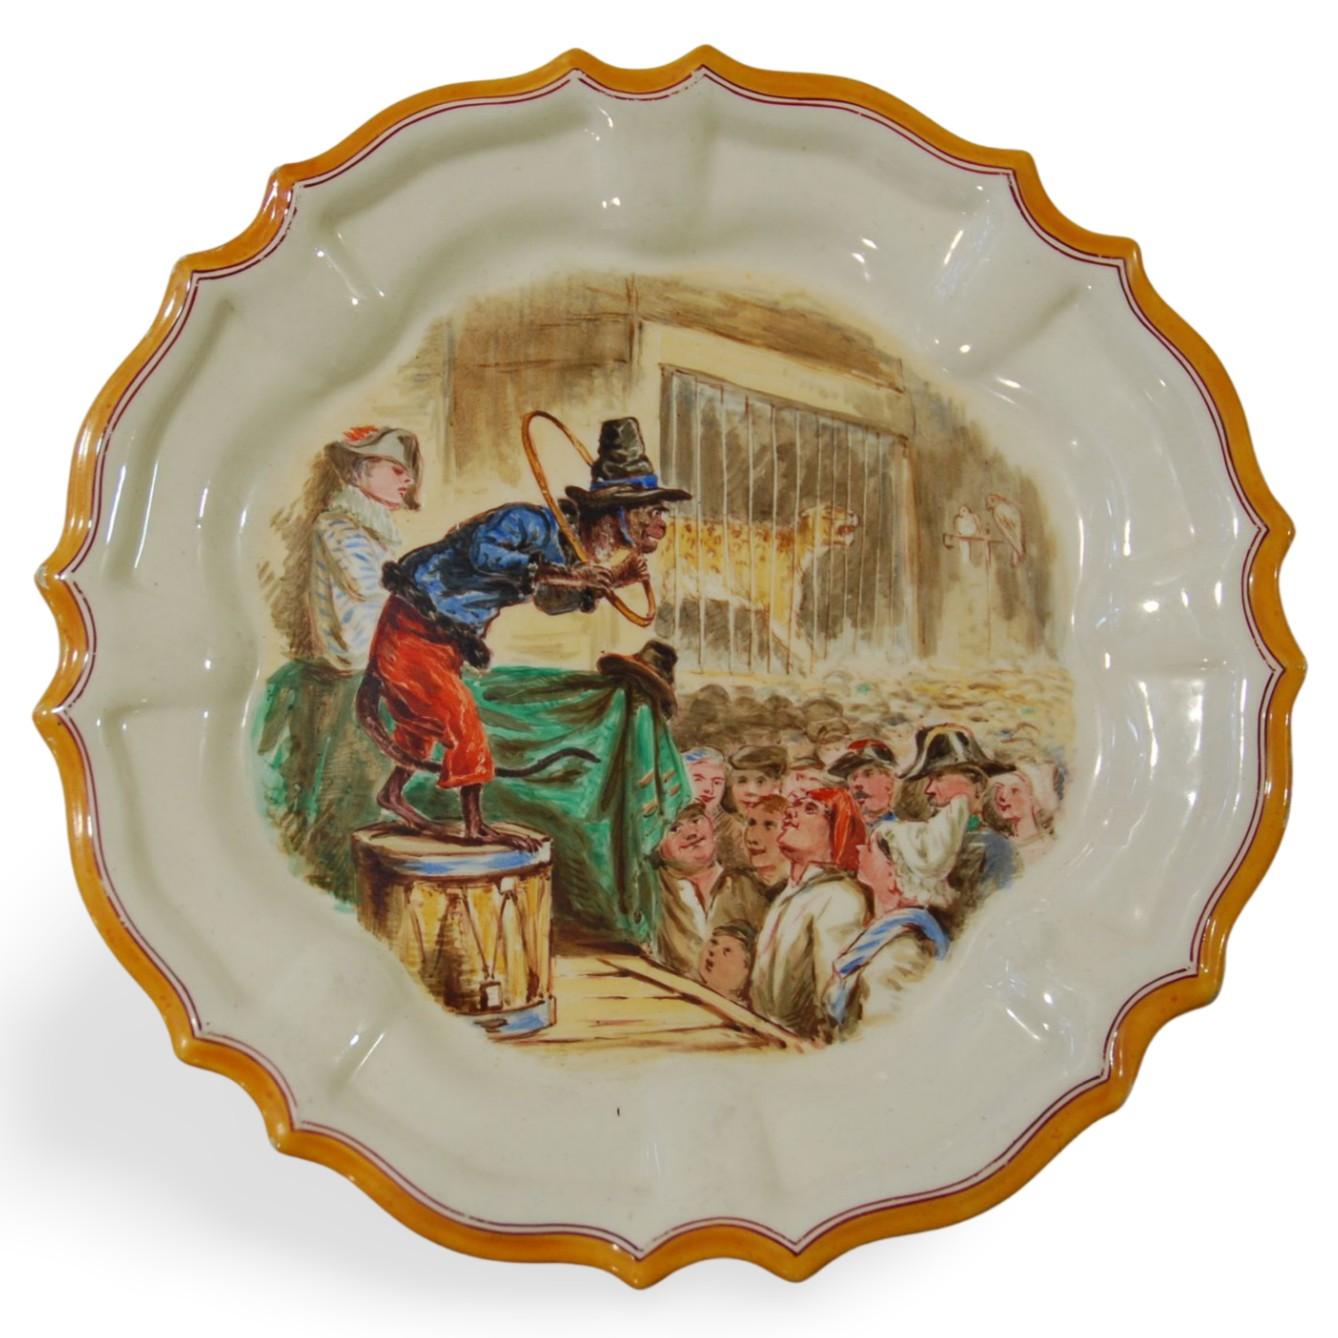 Set of 12 Plates, Aesop Fables, Wedgwood, circa 1860 For Sale 7